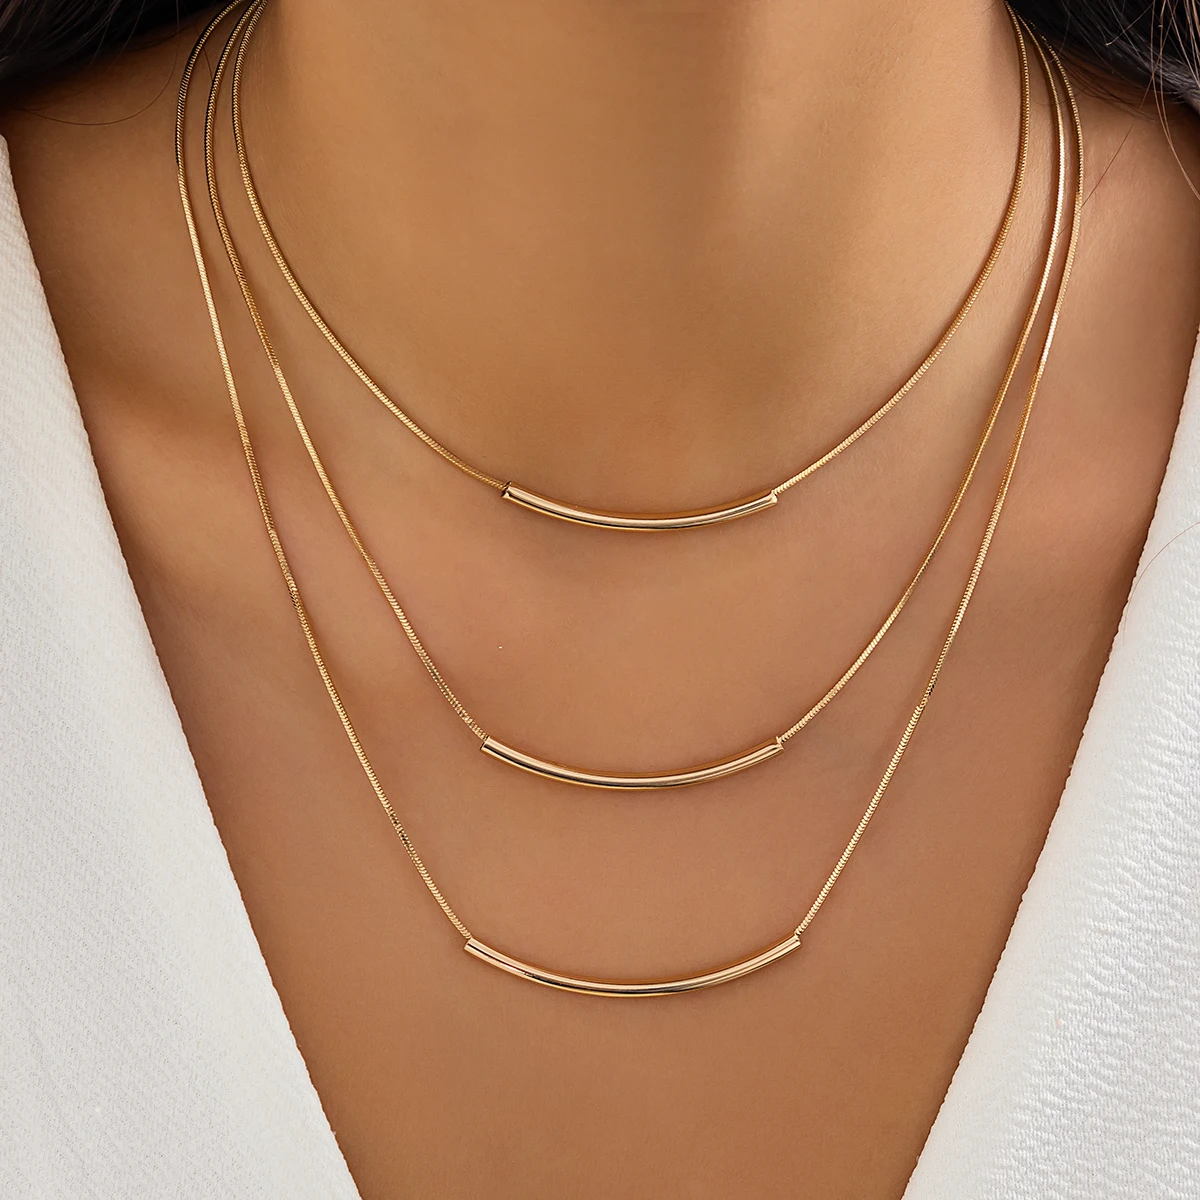 

Lacteo Vintage Geometric Tube Shape Charm Necklace Multilayer Metal Snake Chain Choker Women Party Gifts Jewelry Wedding Ladies